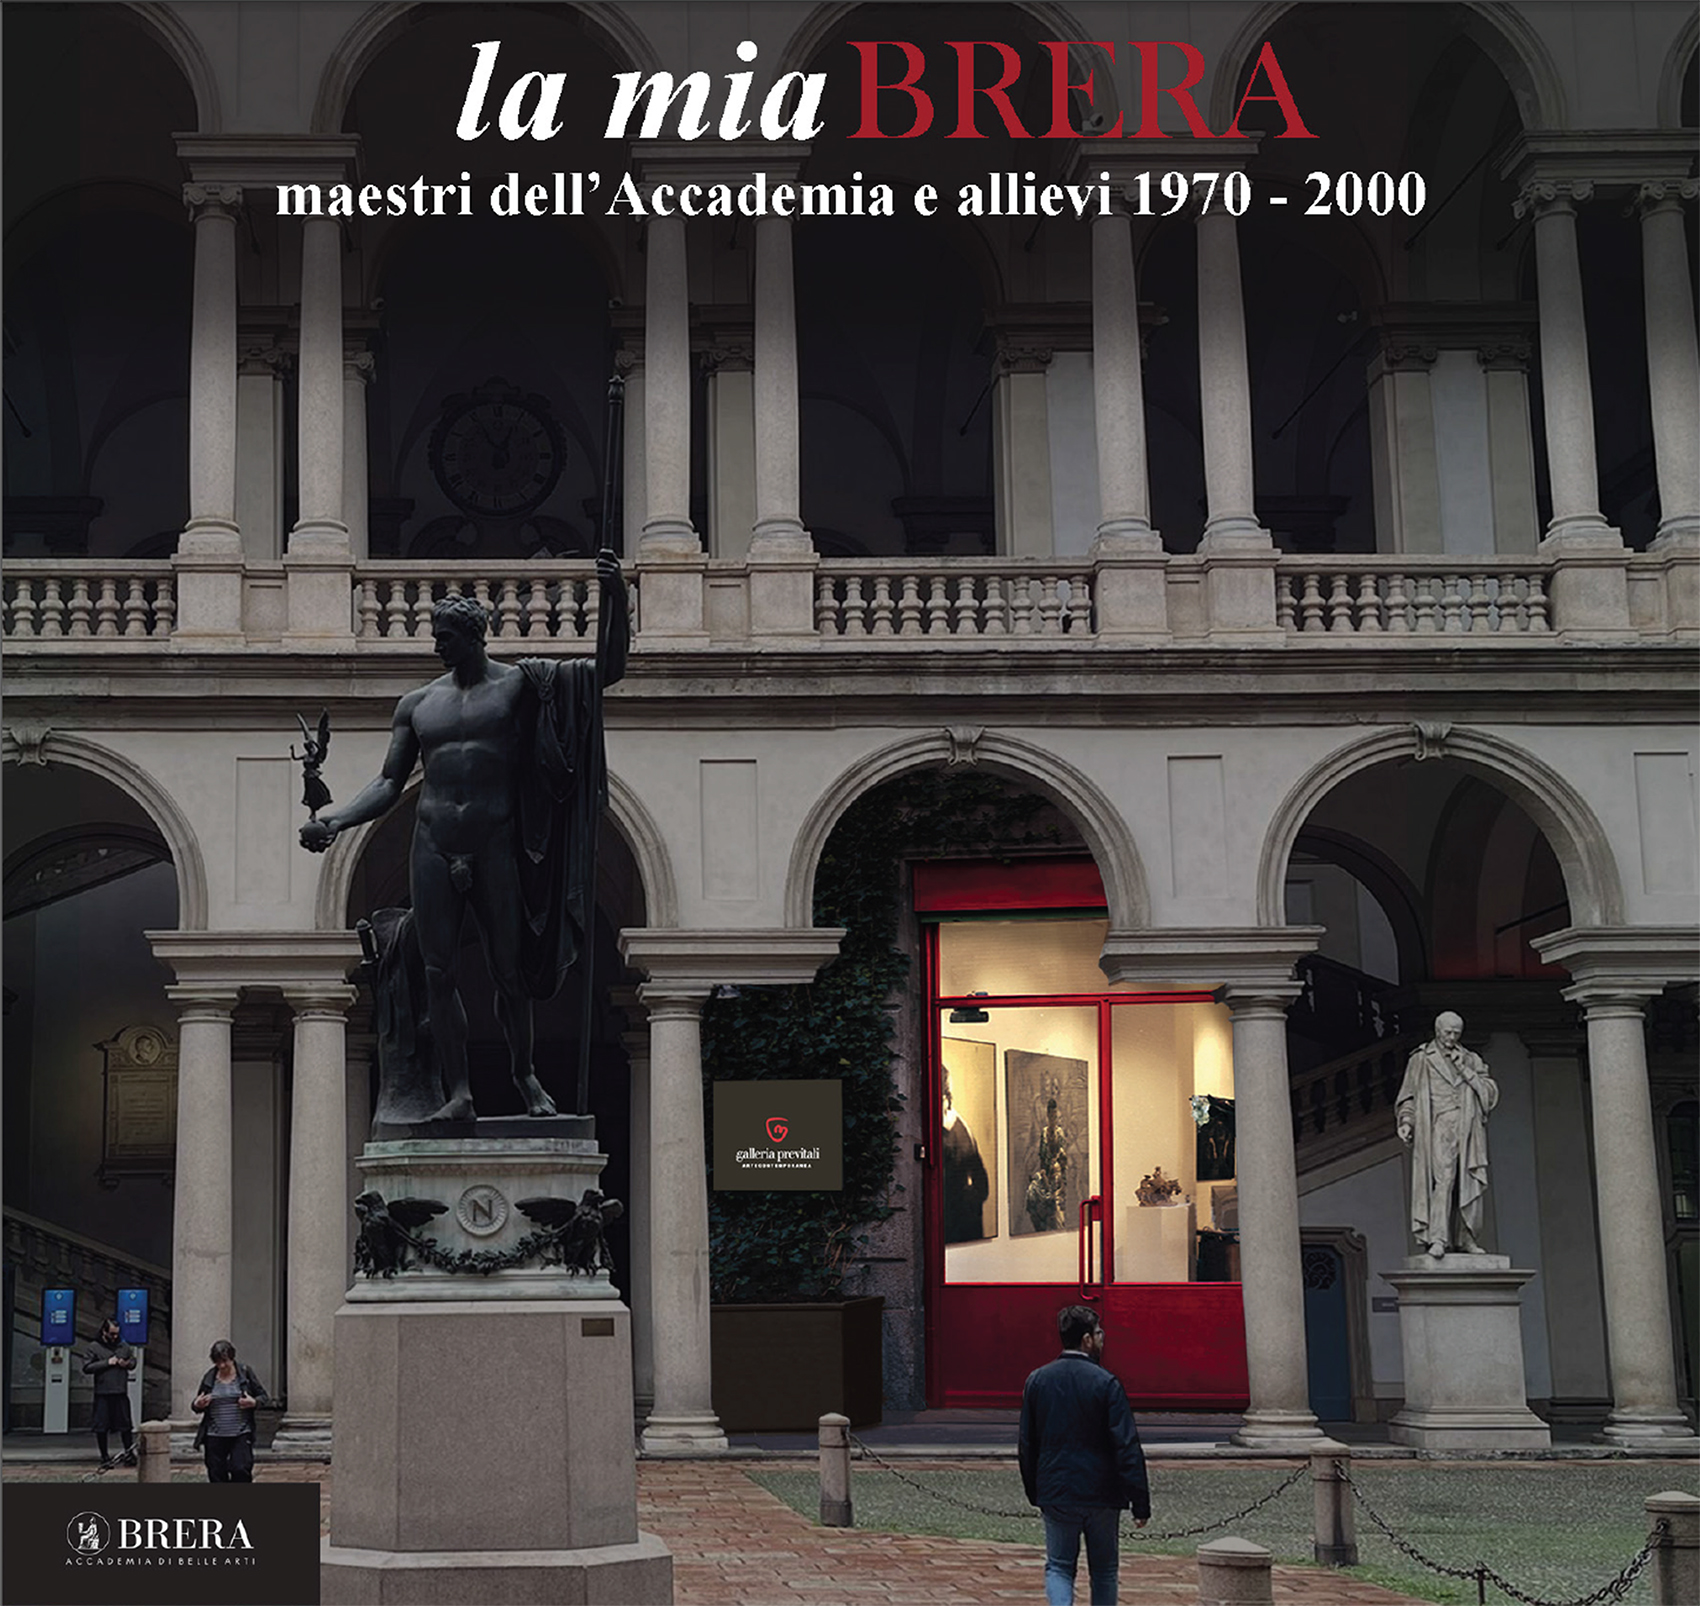 I am delighted to announce my participation in the exhibition 'La mia Brera' curated by Elena Pontiggia from 15 December to 11 March 2023 at the Previtali Gallery in Via Lombardini 14 Milan Opening 15 December at 6.30 p.m.